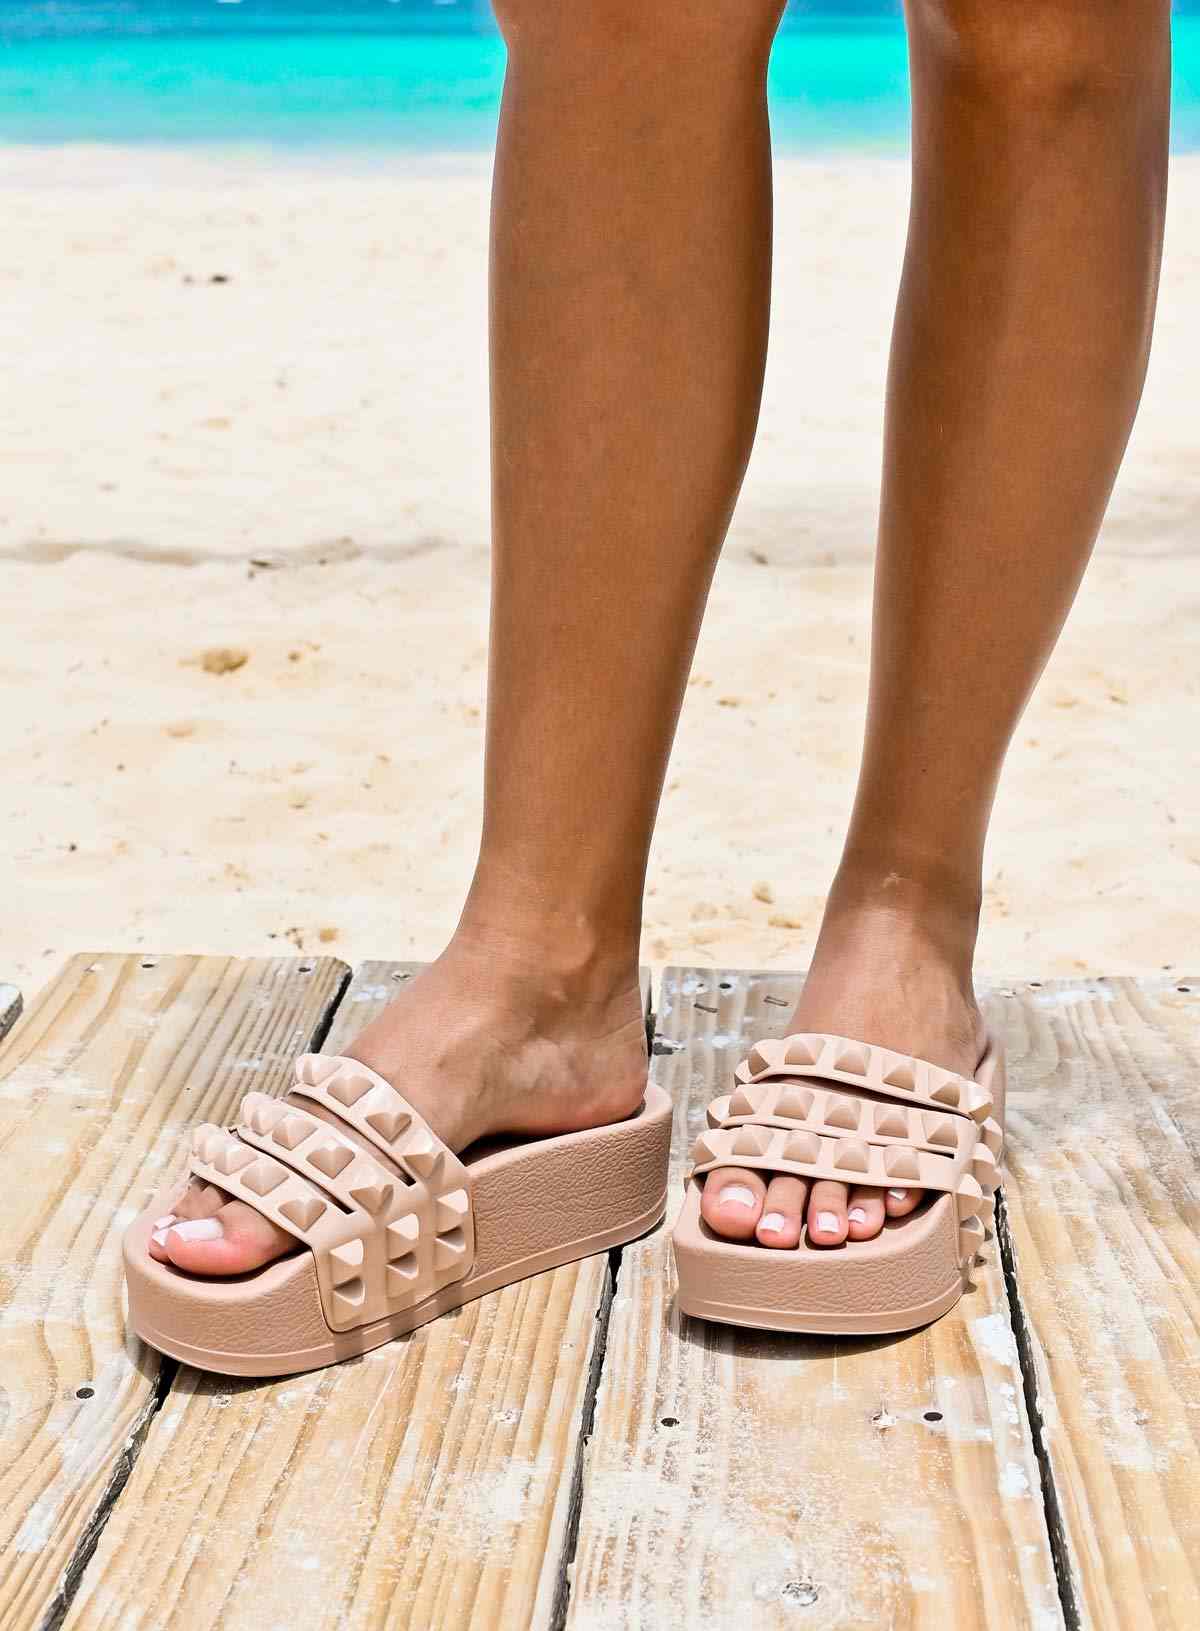 Best Beach slide sandals for beach lover from Carmen sol. Reach for the sky and rock your beach style with platform flip-flops